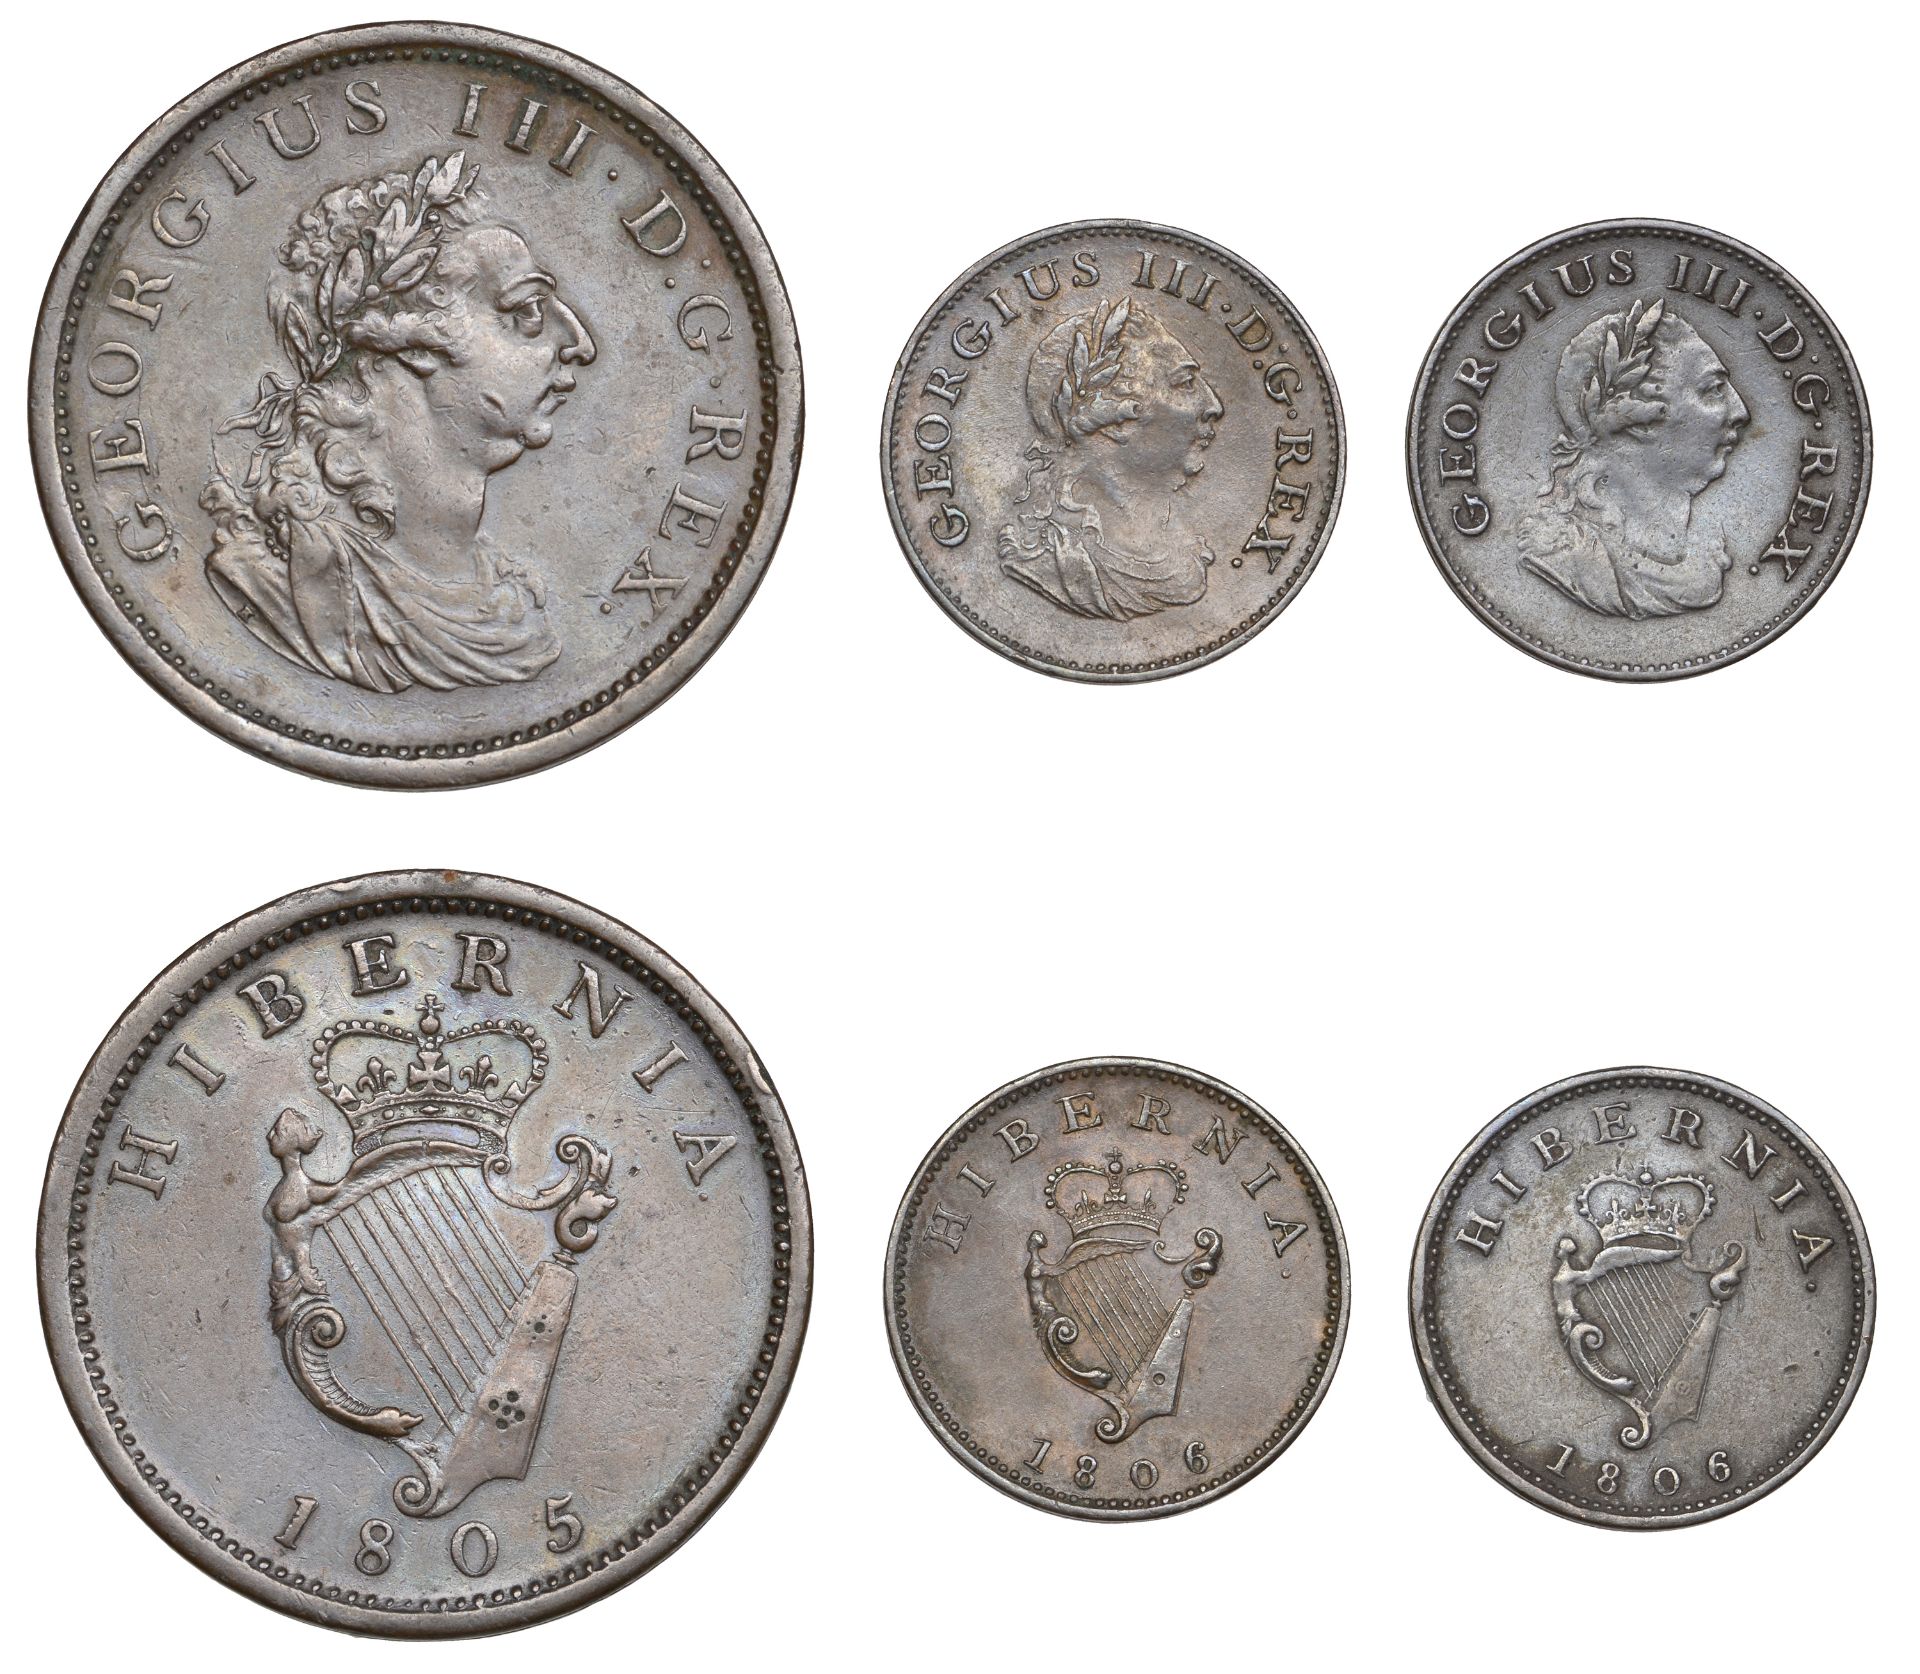 George III (1760-1820), Soho coinage, Penny, 1805, Farthings (2), both 1806 (S 6620, 6622) [...